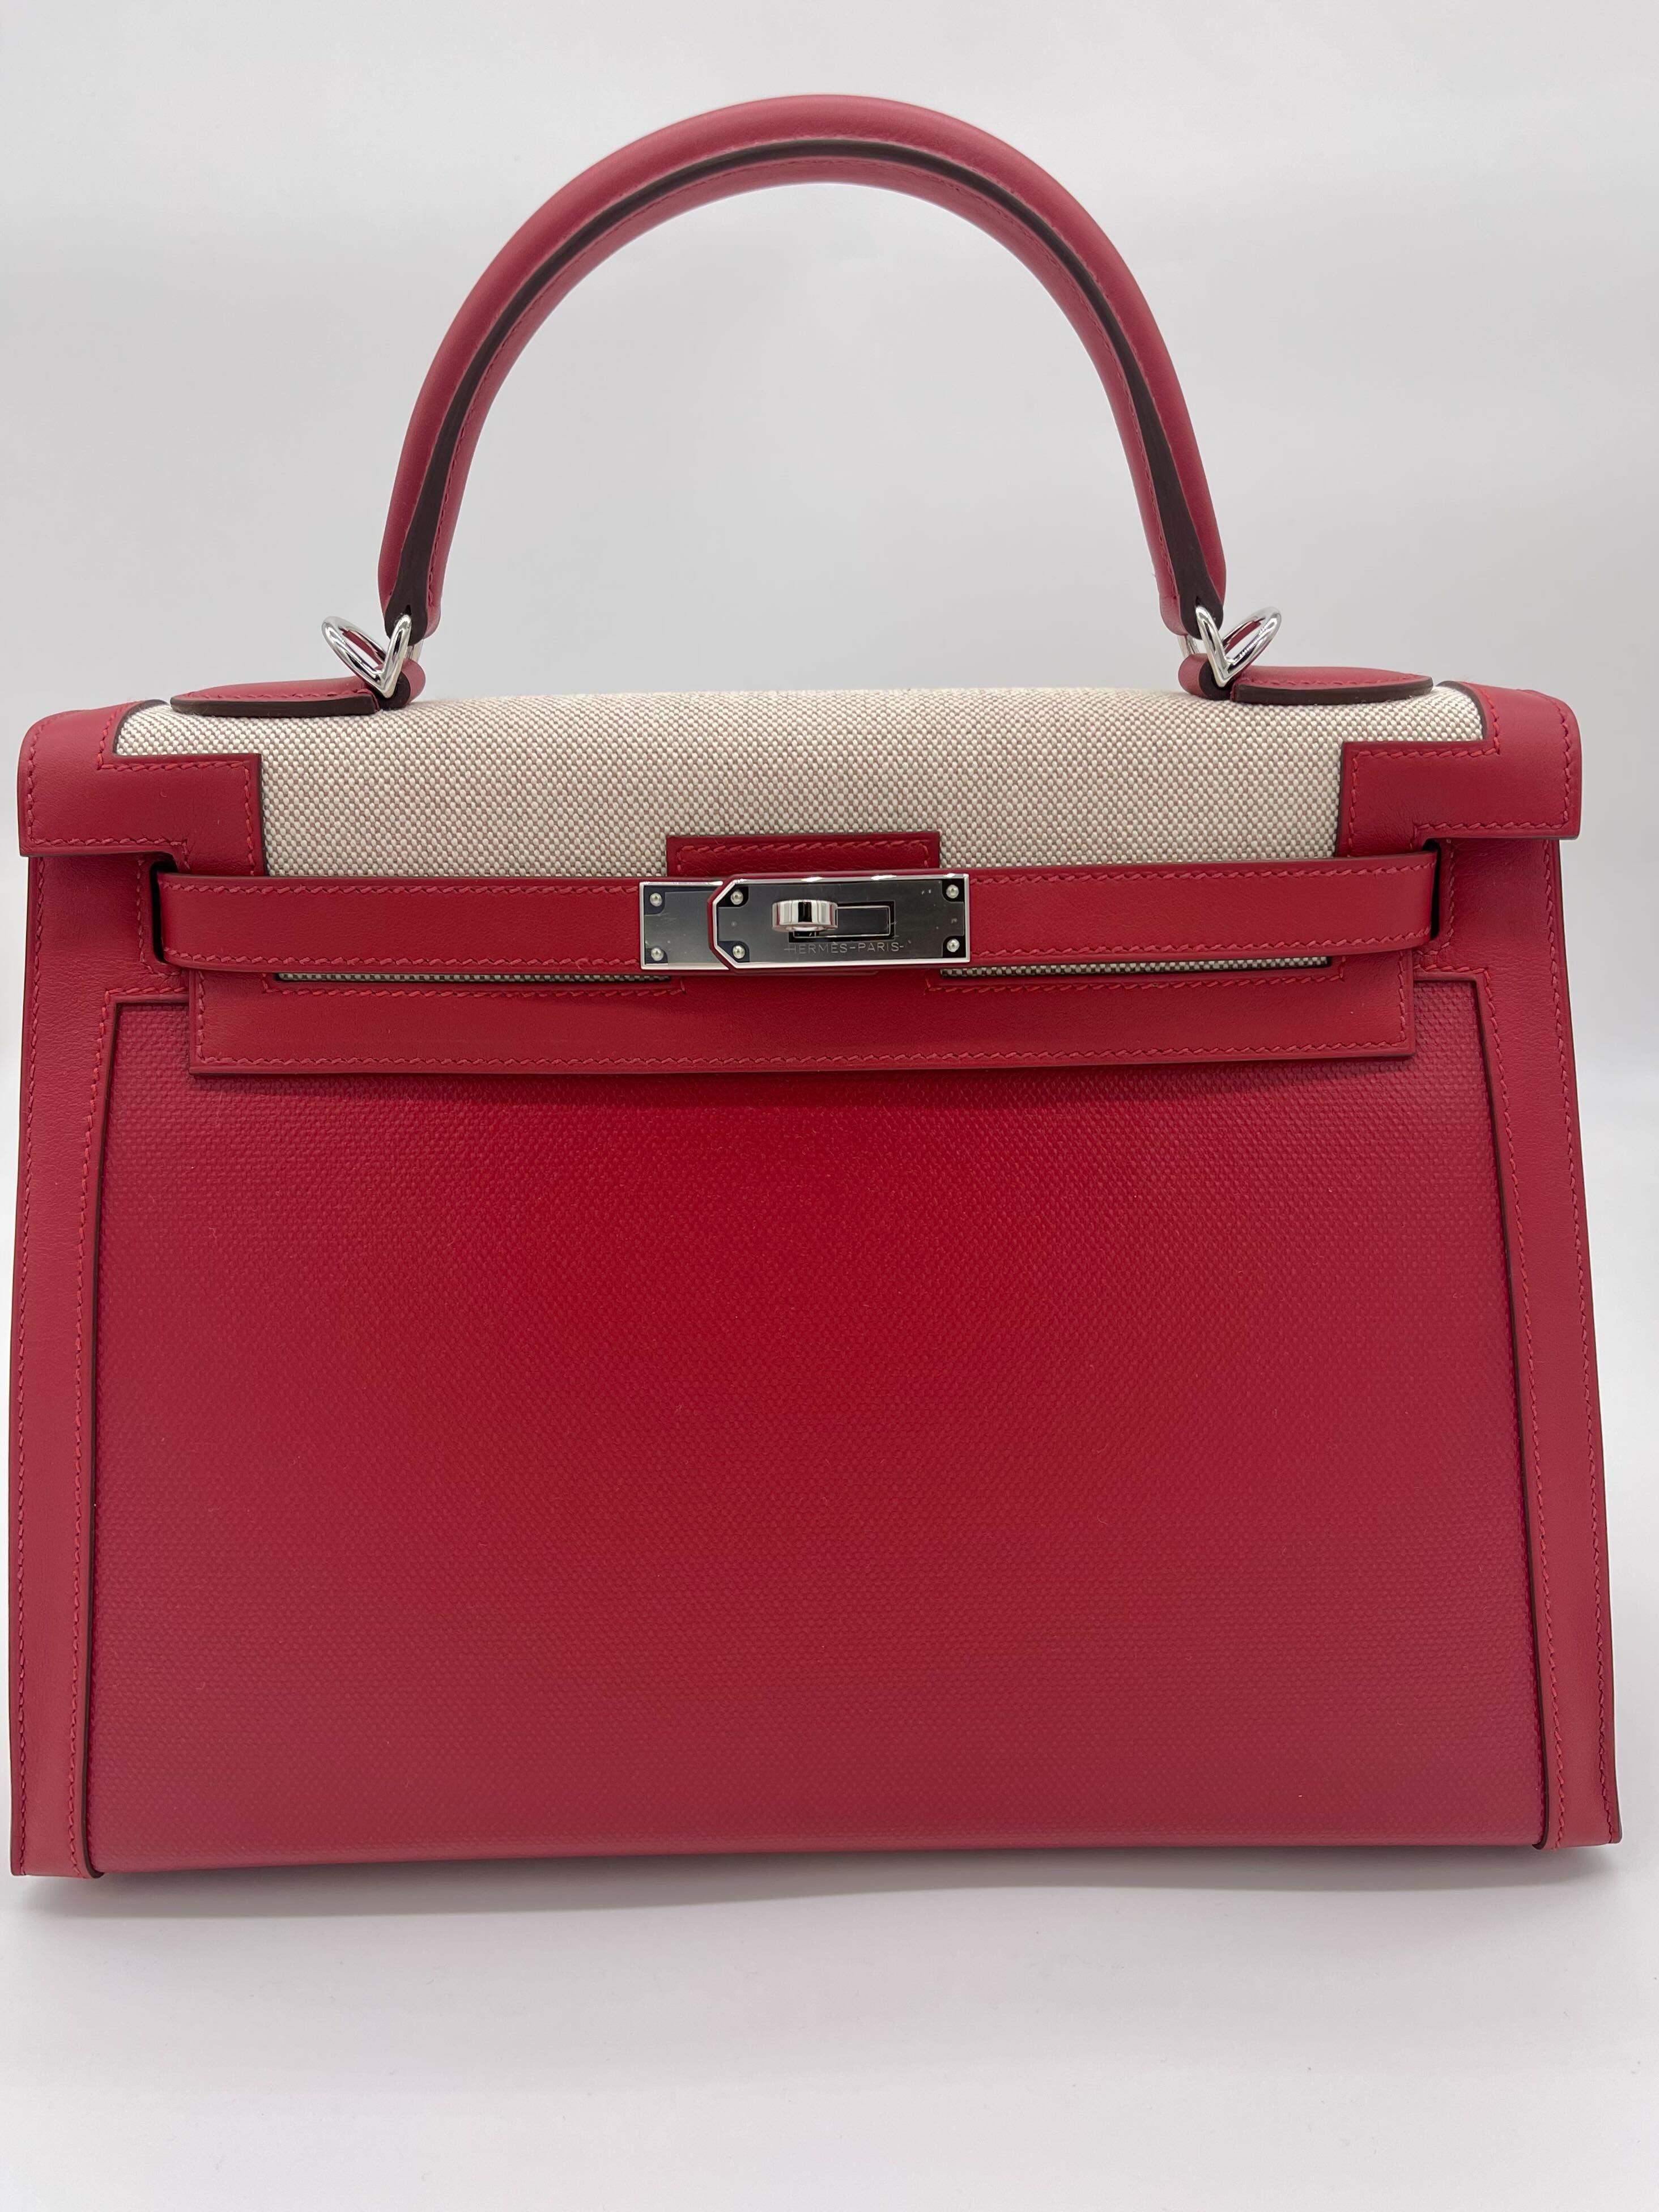 Hermes Kelly 32 Sellier Rouge Piment Swift Leather and Toile Berline, Palladium Hardware

Condition: Brand New
Material: Swift Leather and Toile Berline Canvas
Measurements: 32cm x 22cm x 12 cm
Hardware: Palladium plated

*Comes with strap, lock,